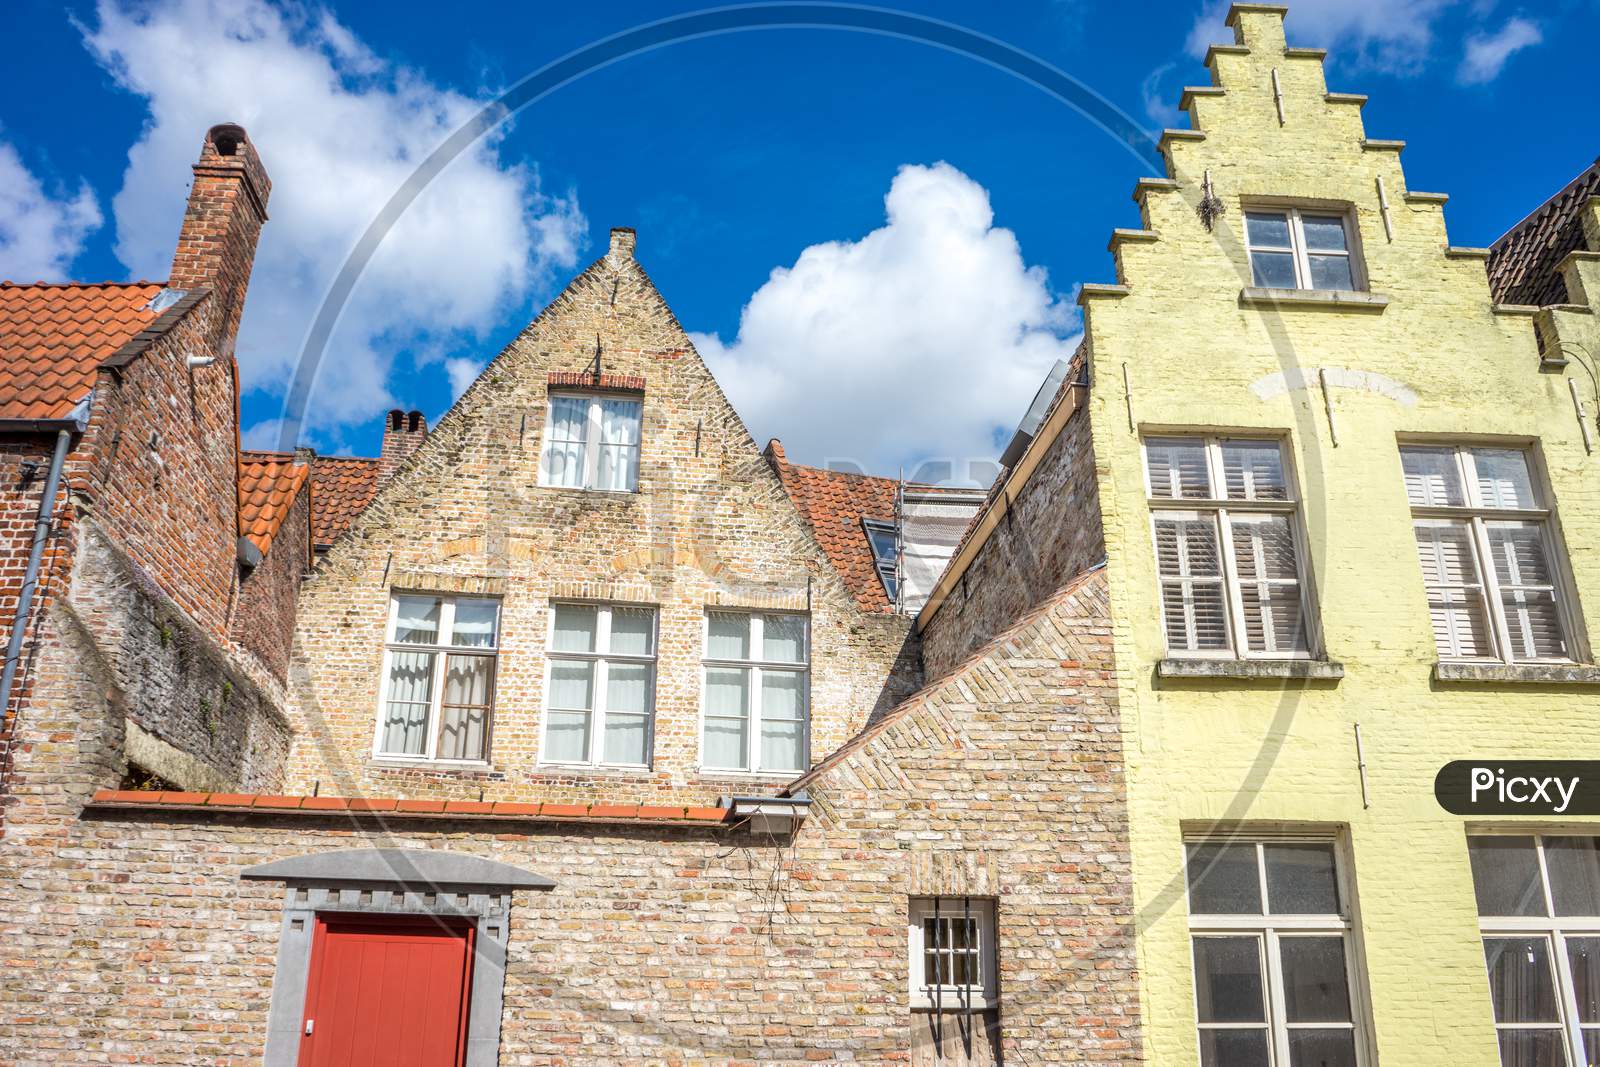 Gable City Skyline In The City Of Brugge, Belgium, Europe